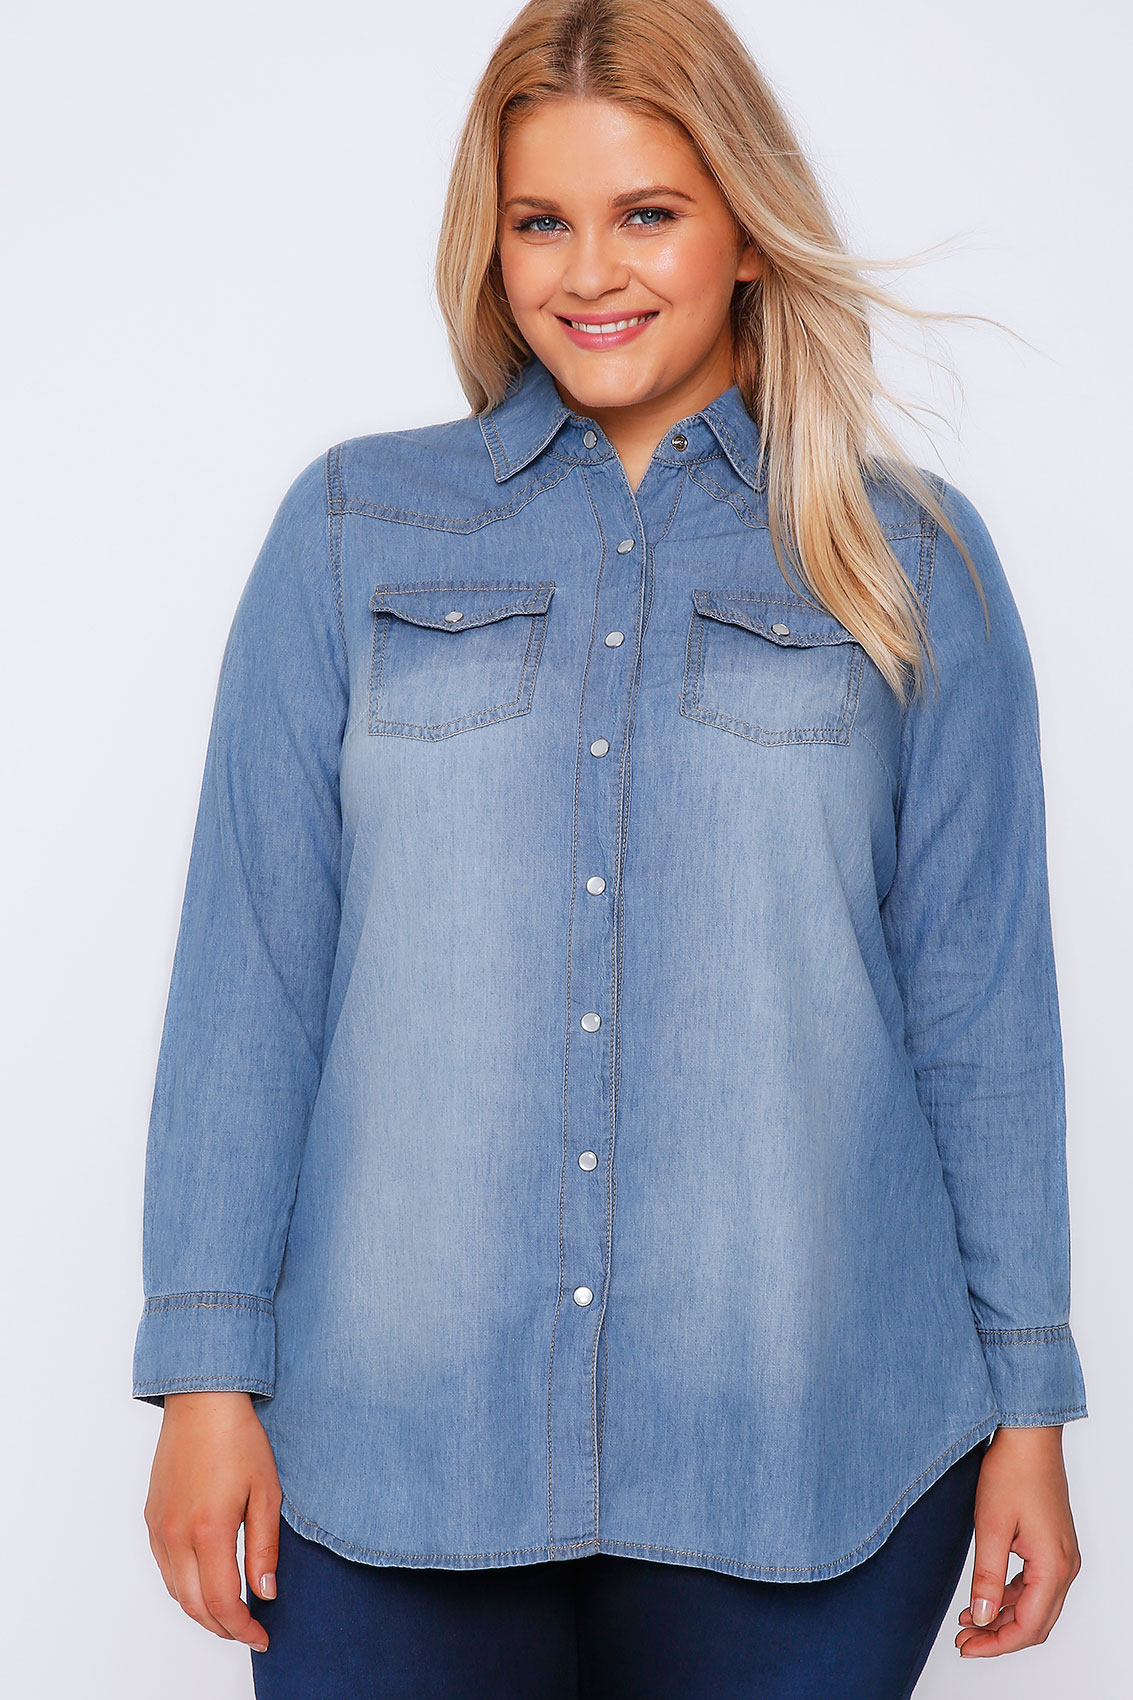 Light Blue Denim Long Sleeved Shirt With Pockets Plus Size 16 to 36